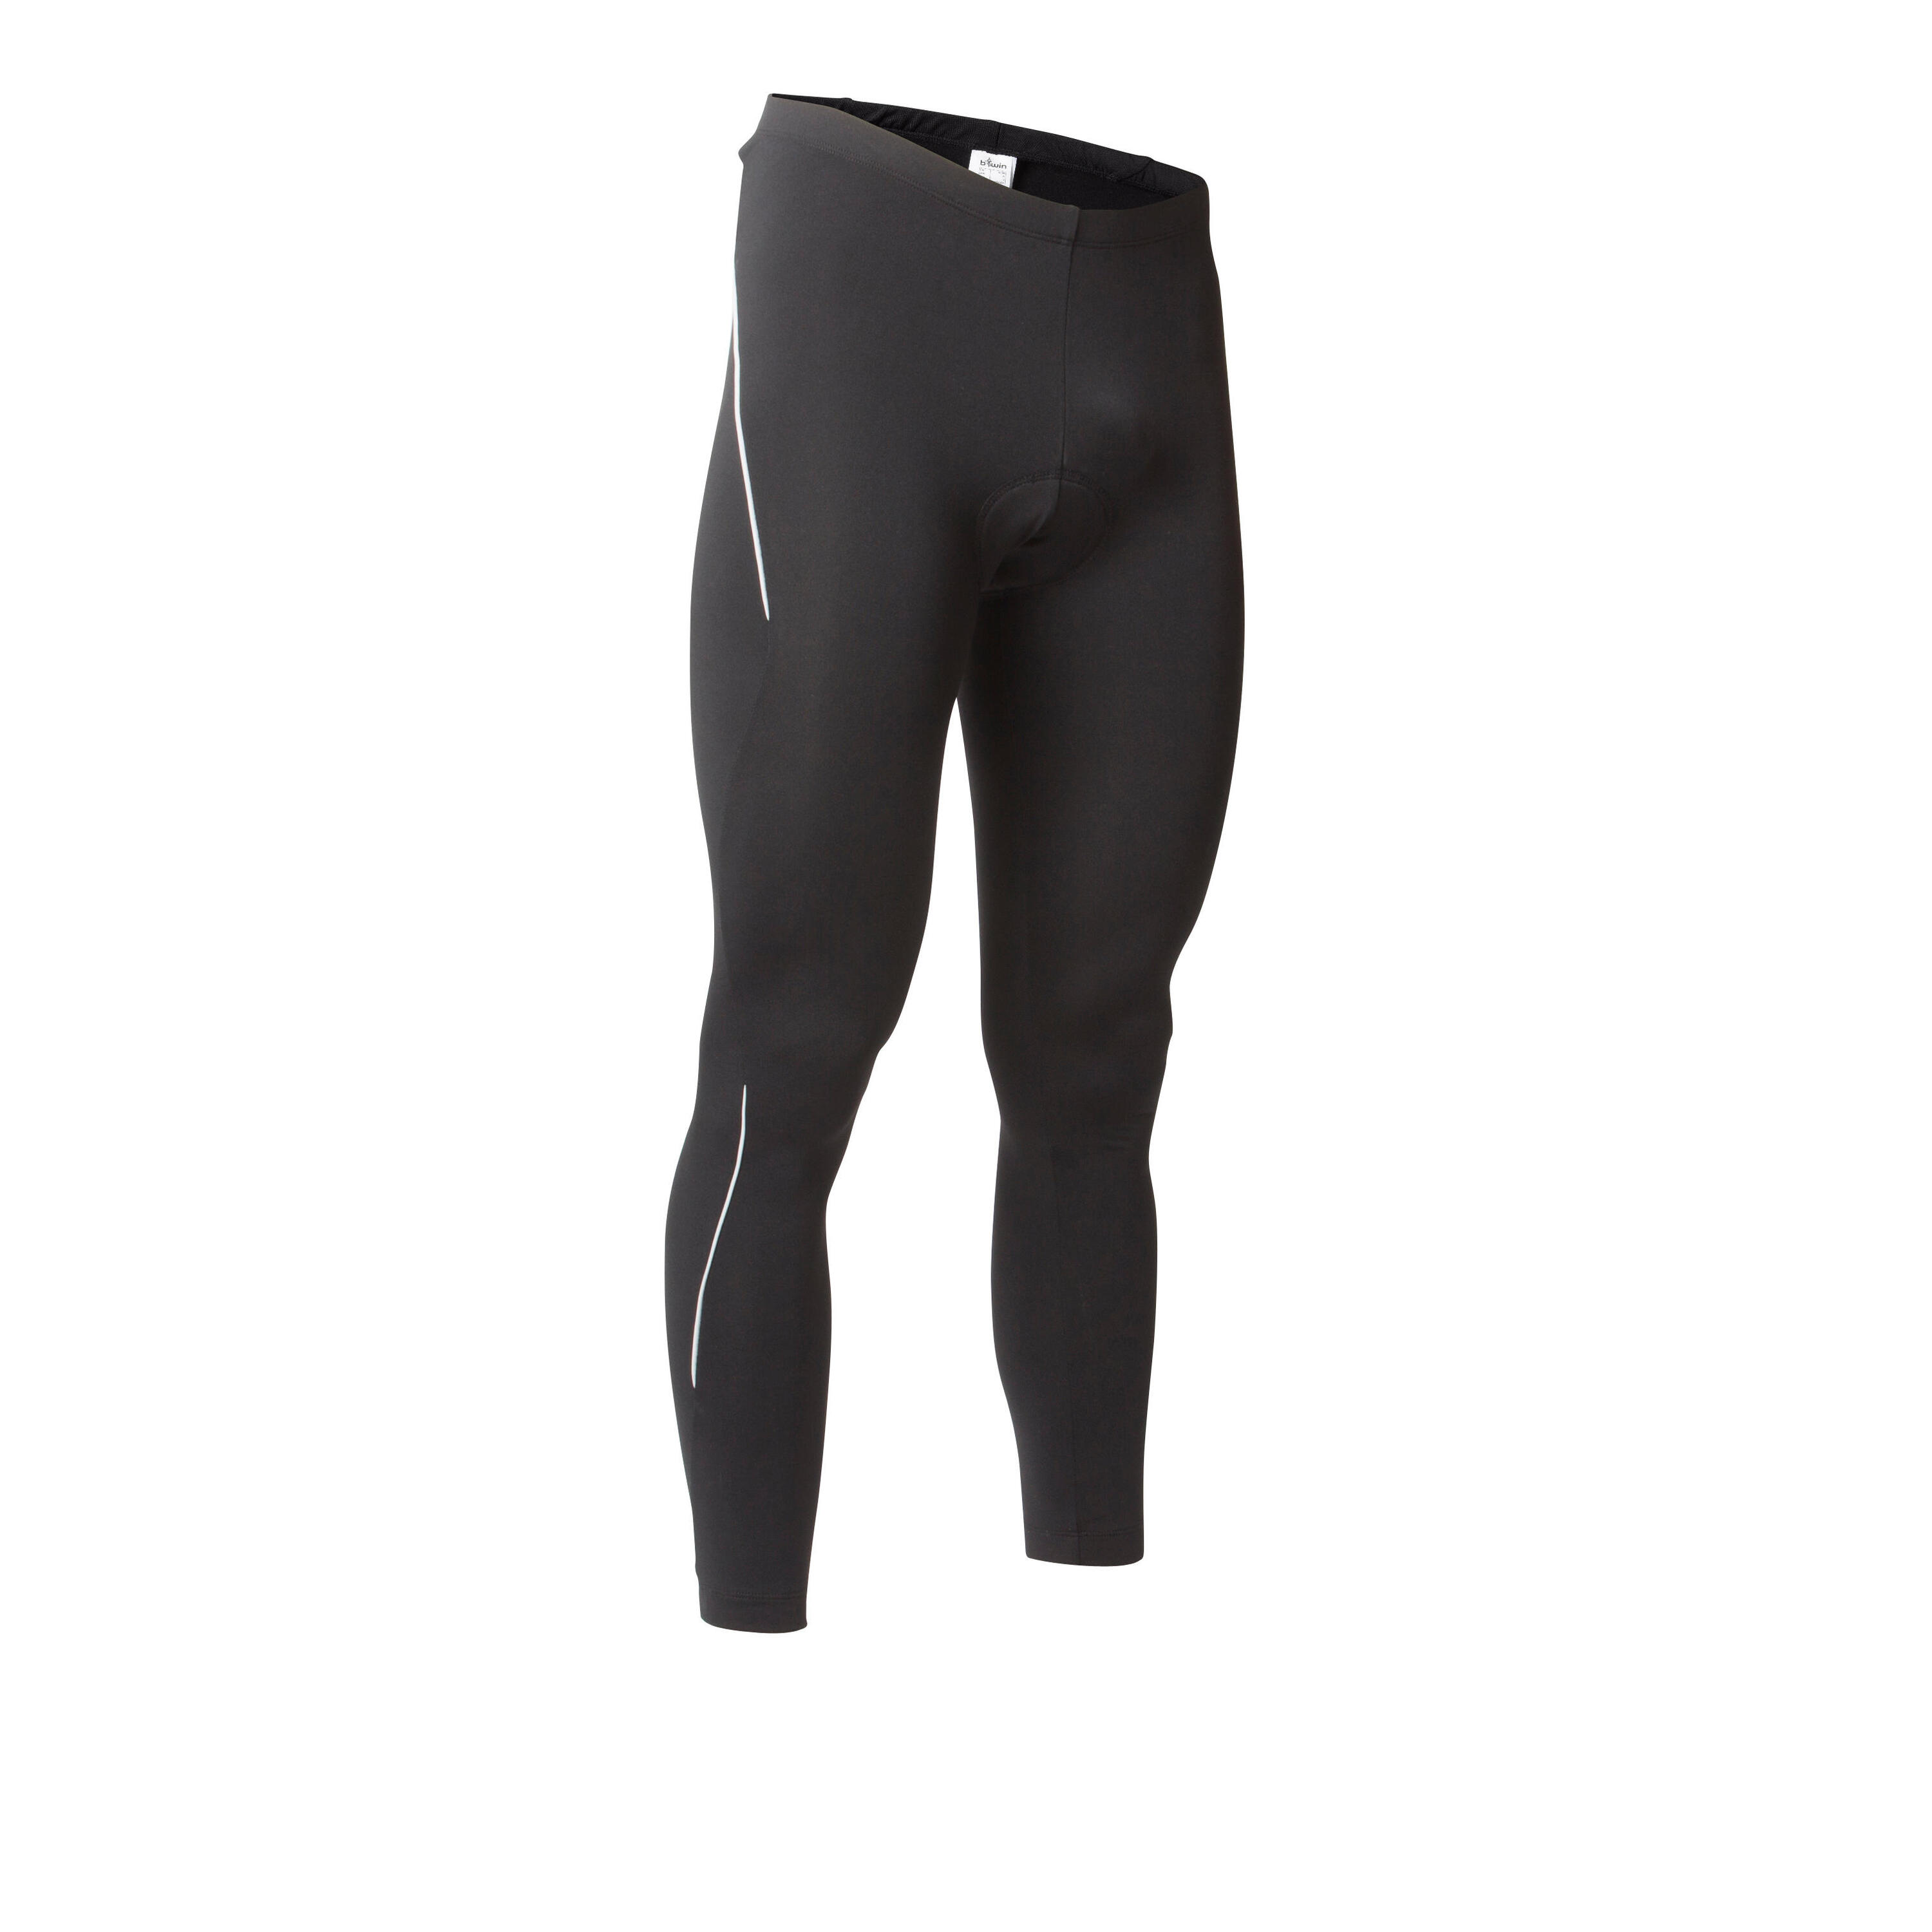 BTWIN RC100 Winter Cycling Tights - Black